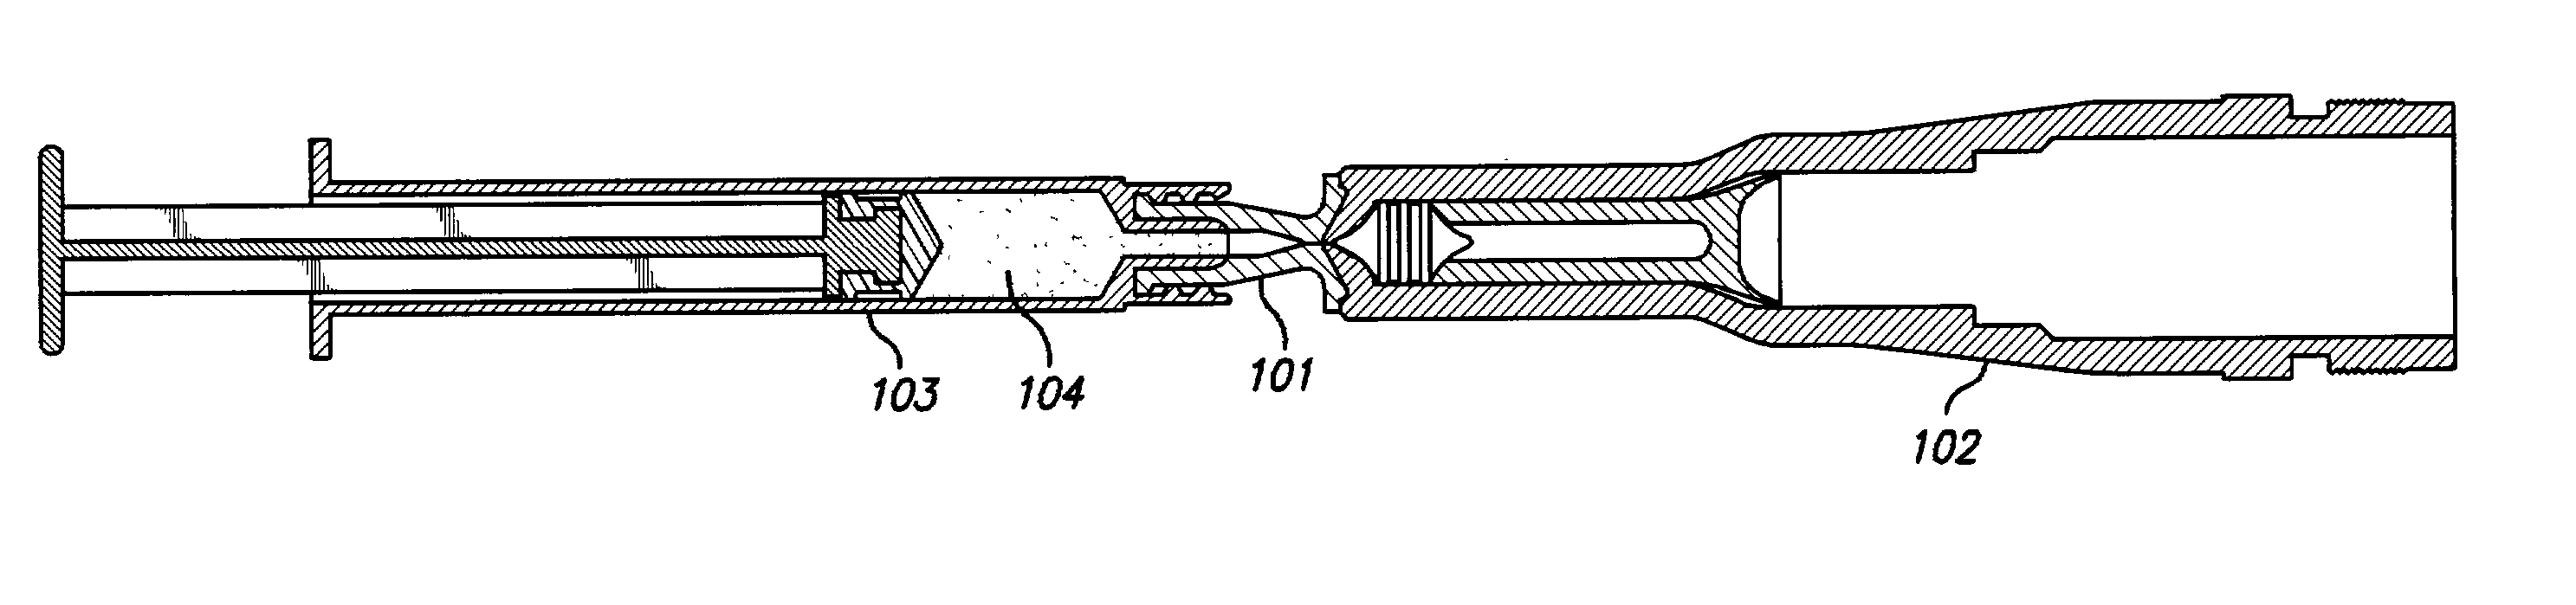 Method and apparatus for filling or refilling a needle-less injector